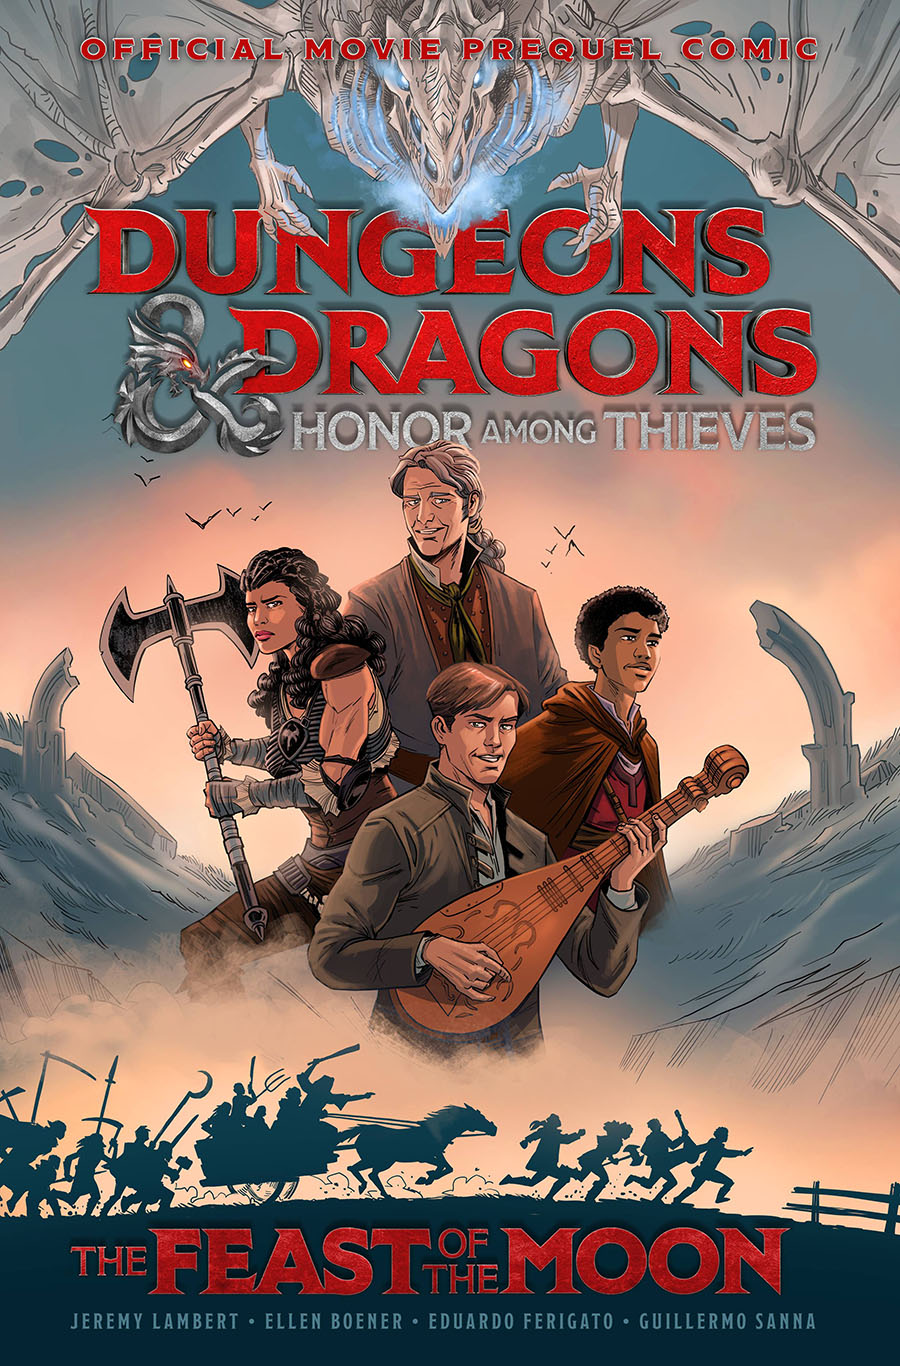 Dungeons And Dragons Honor Among Thieves The Feast Of The Moon TP